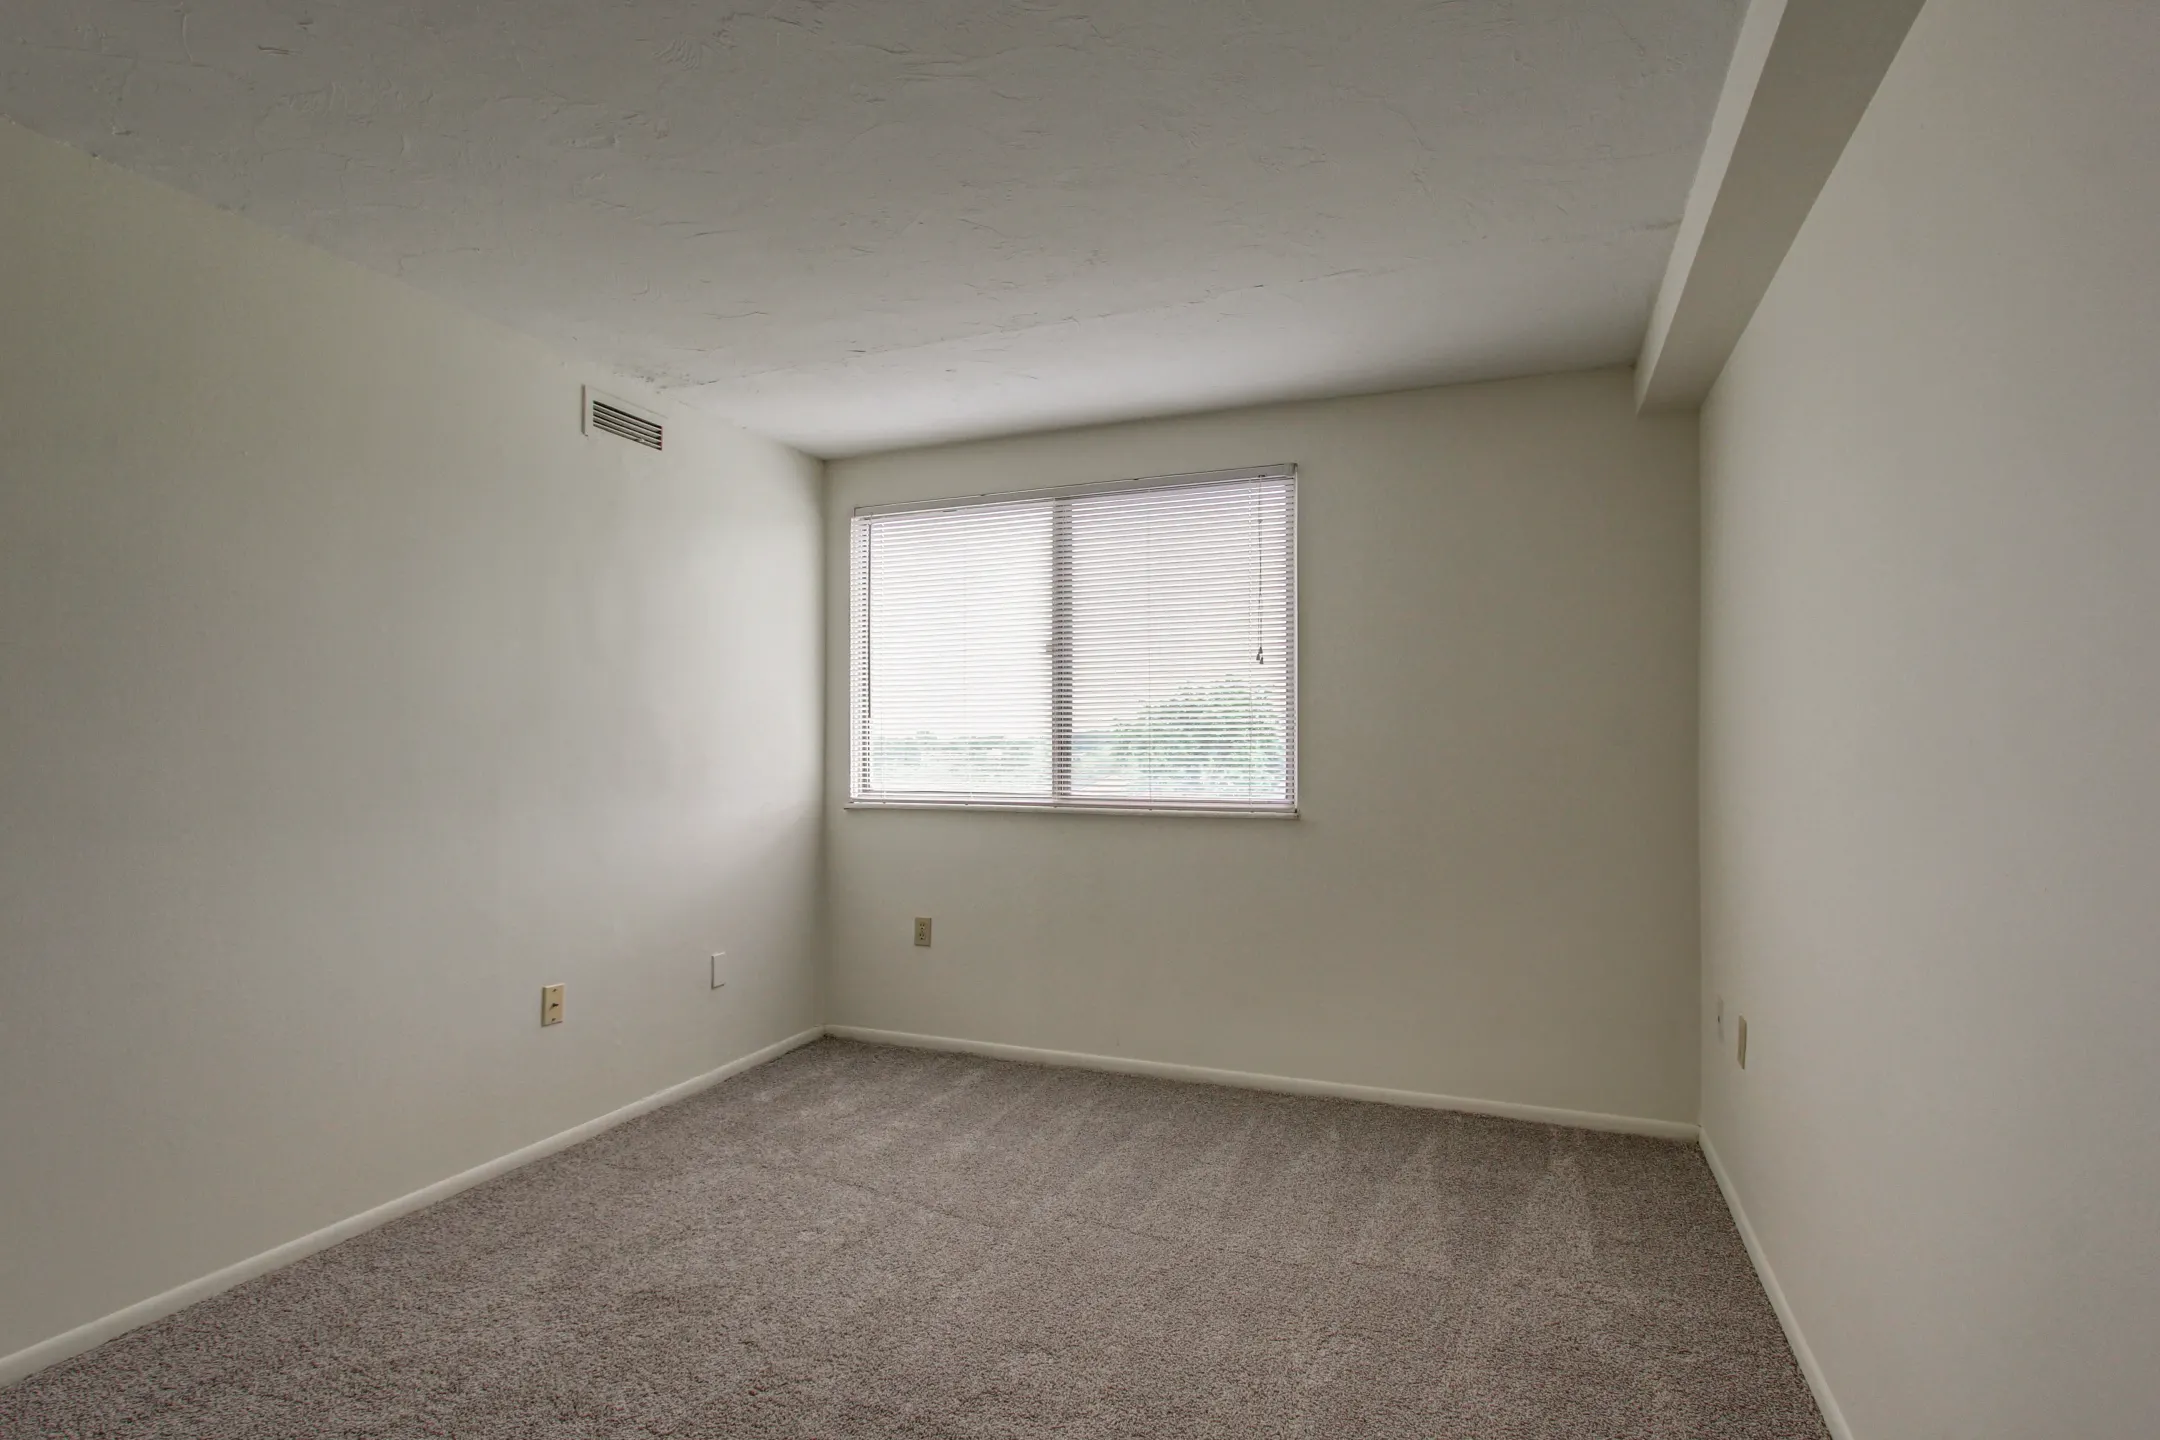 Bedroom - Portage Towers - Cuyahoga Falls, OH